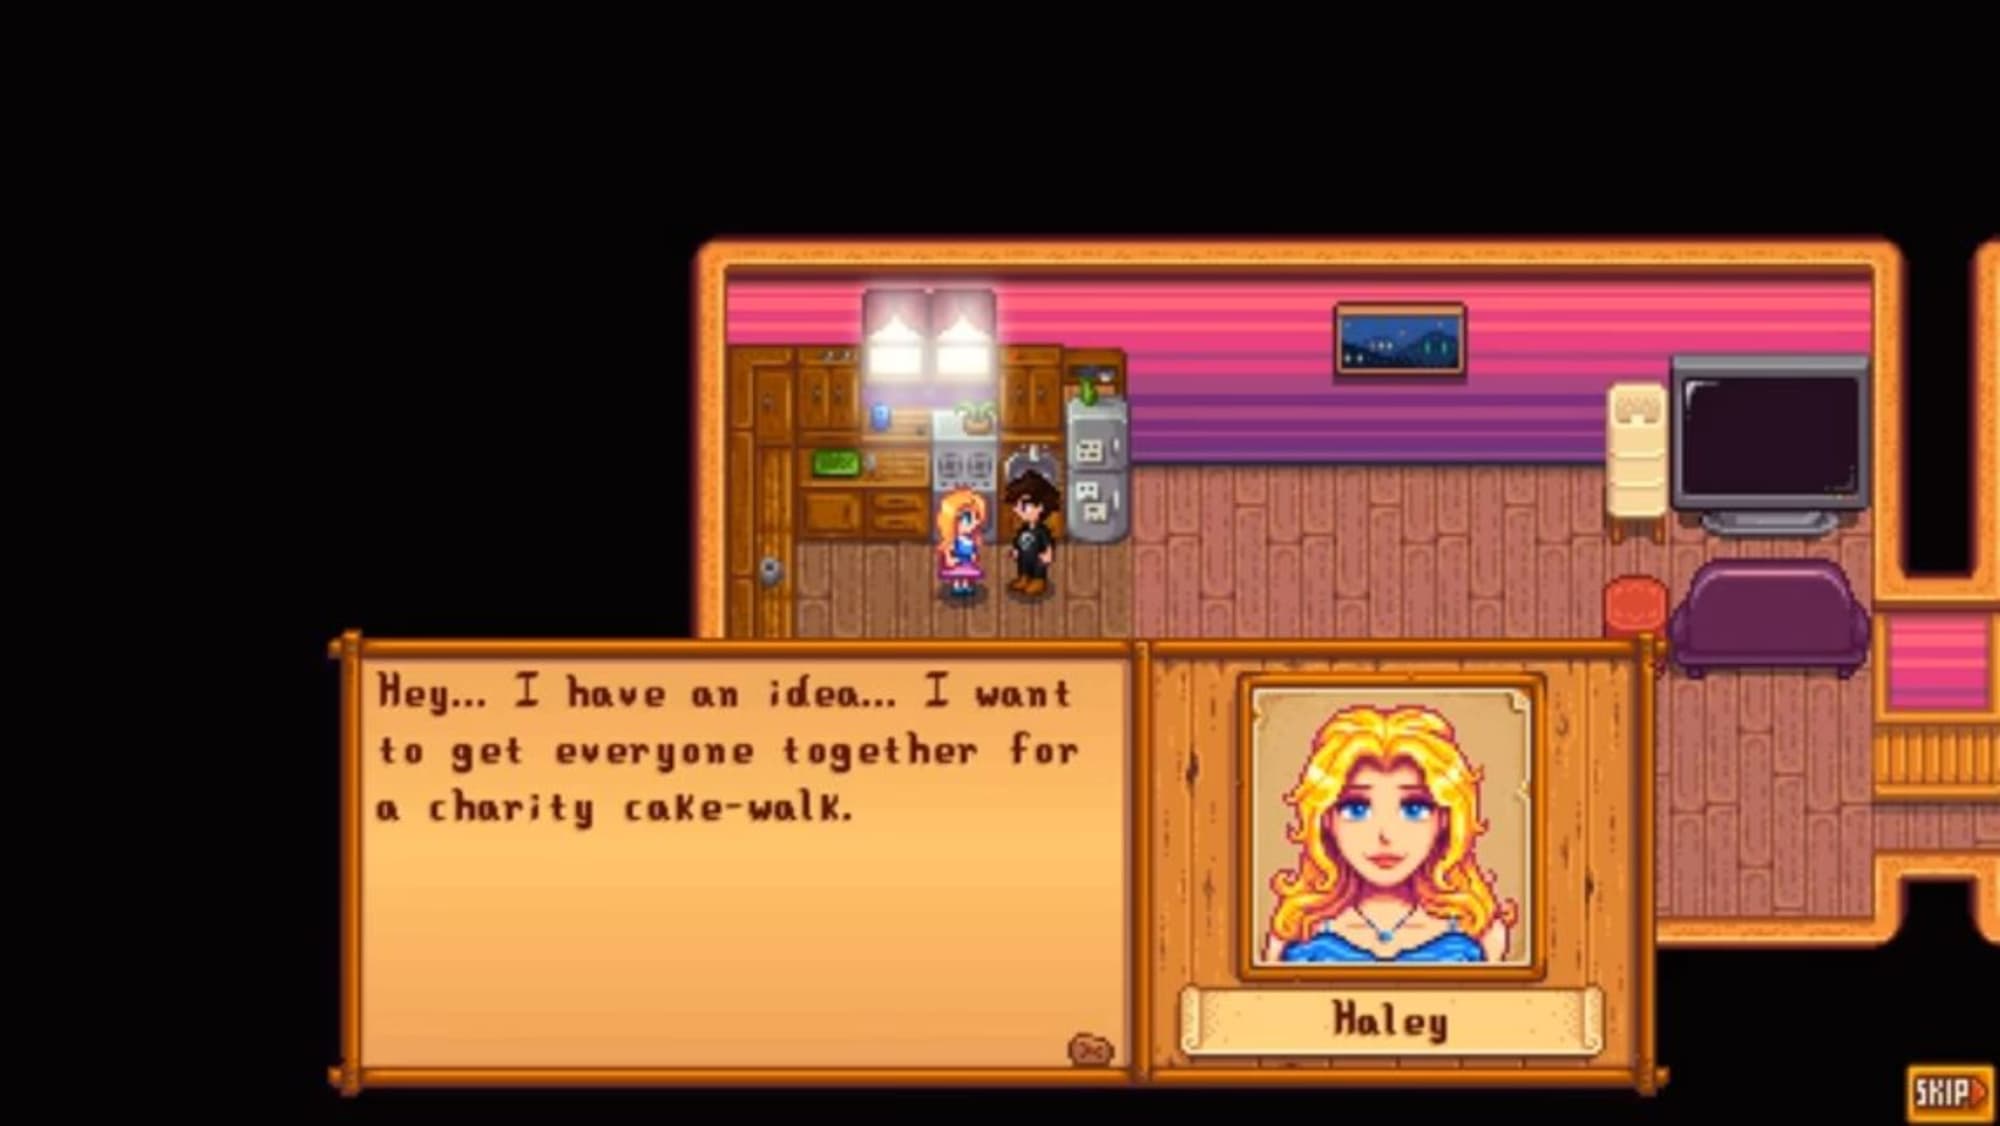 stardew valley dating everyone marriage